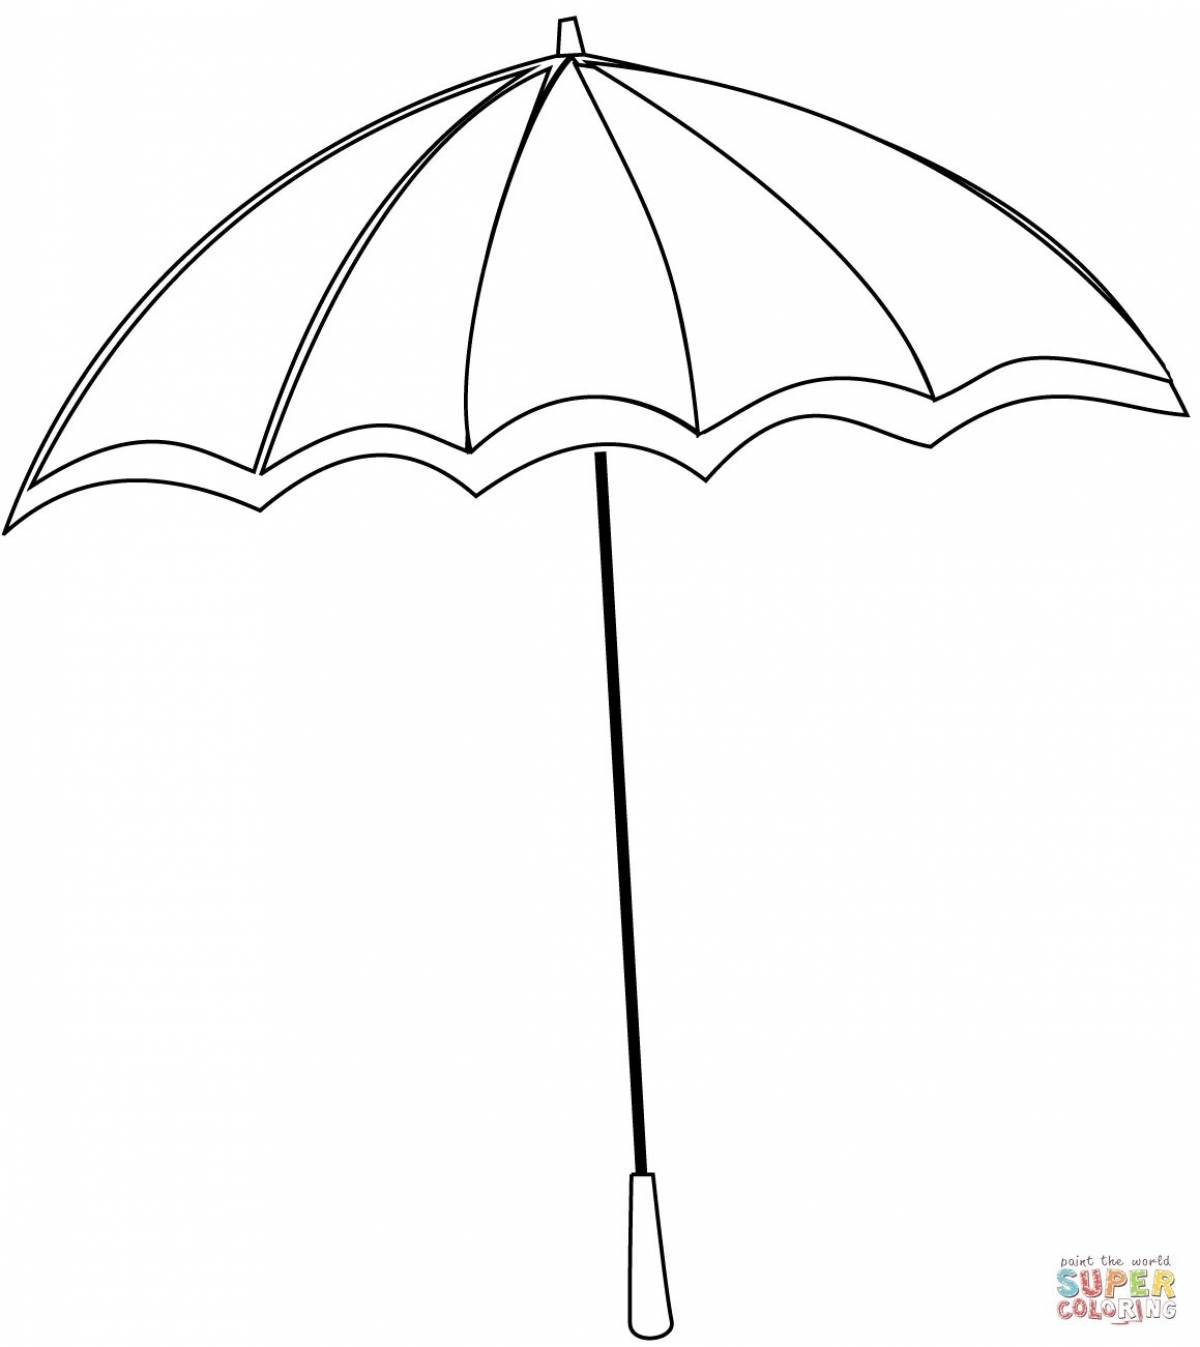 Multi-colored vegetable umbrella coloring book for 3-4 year olds